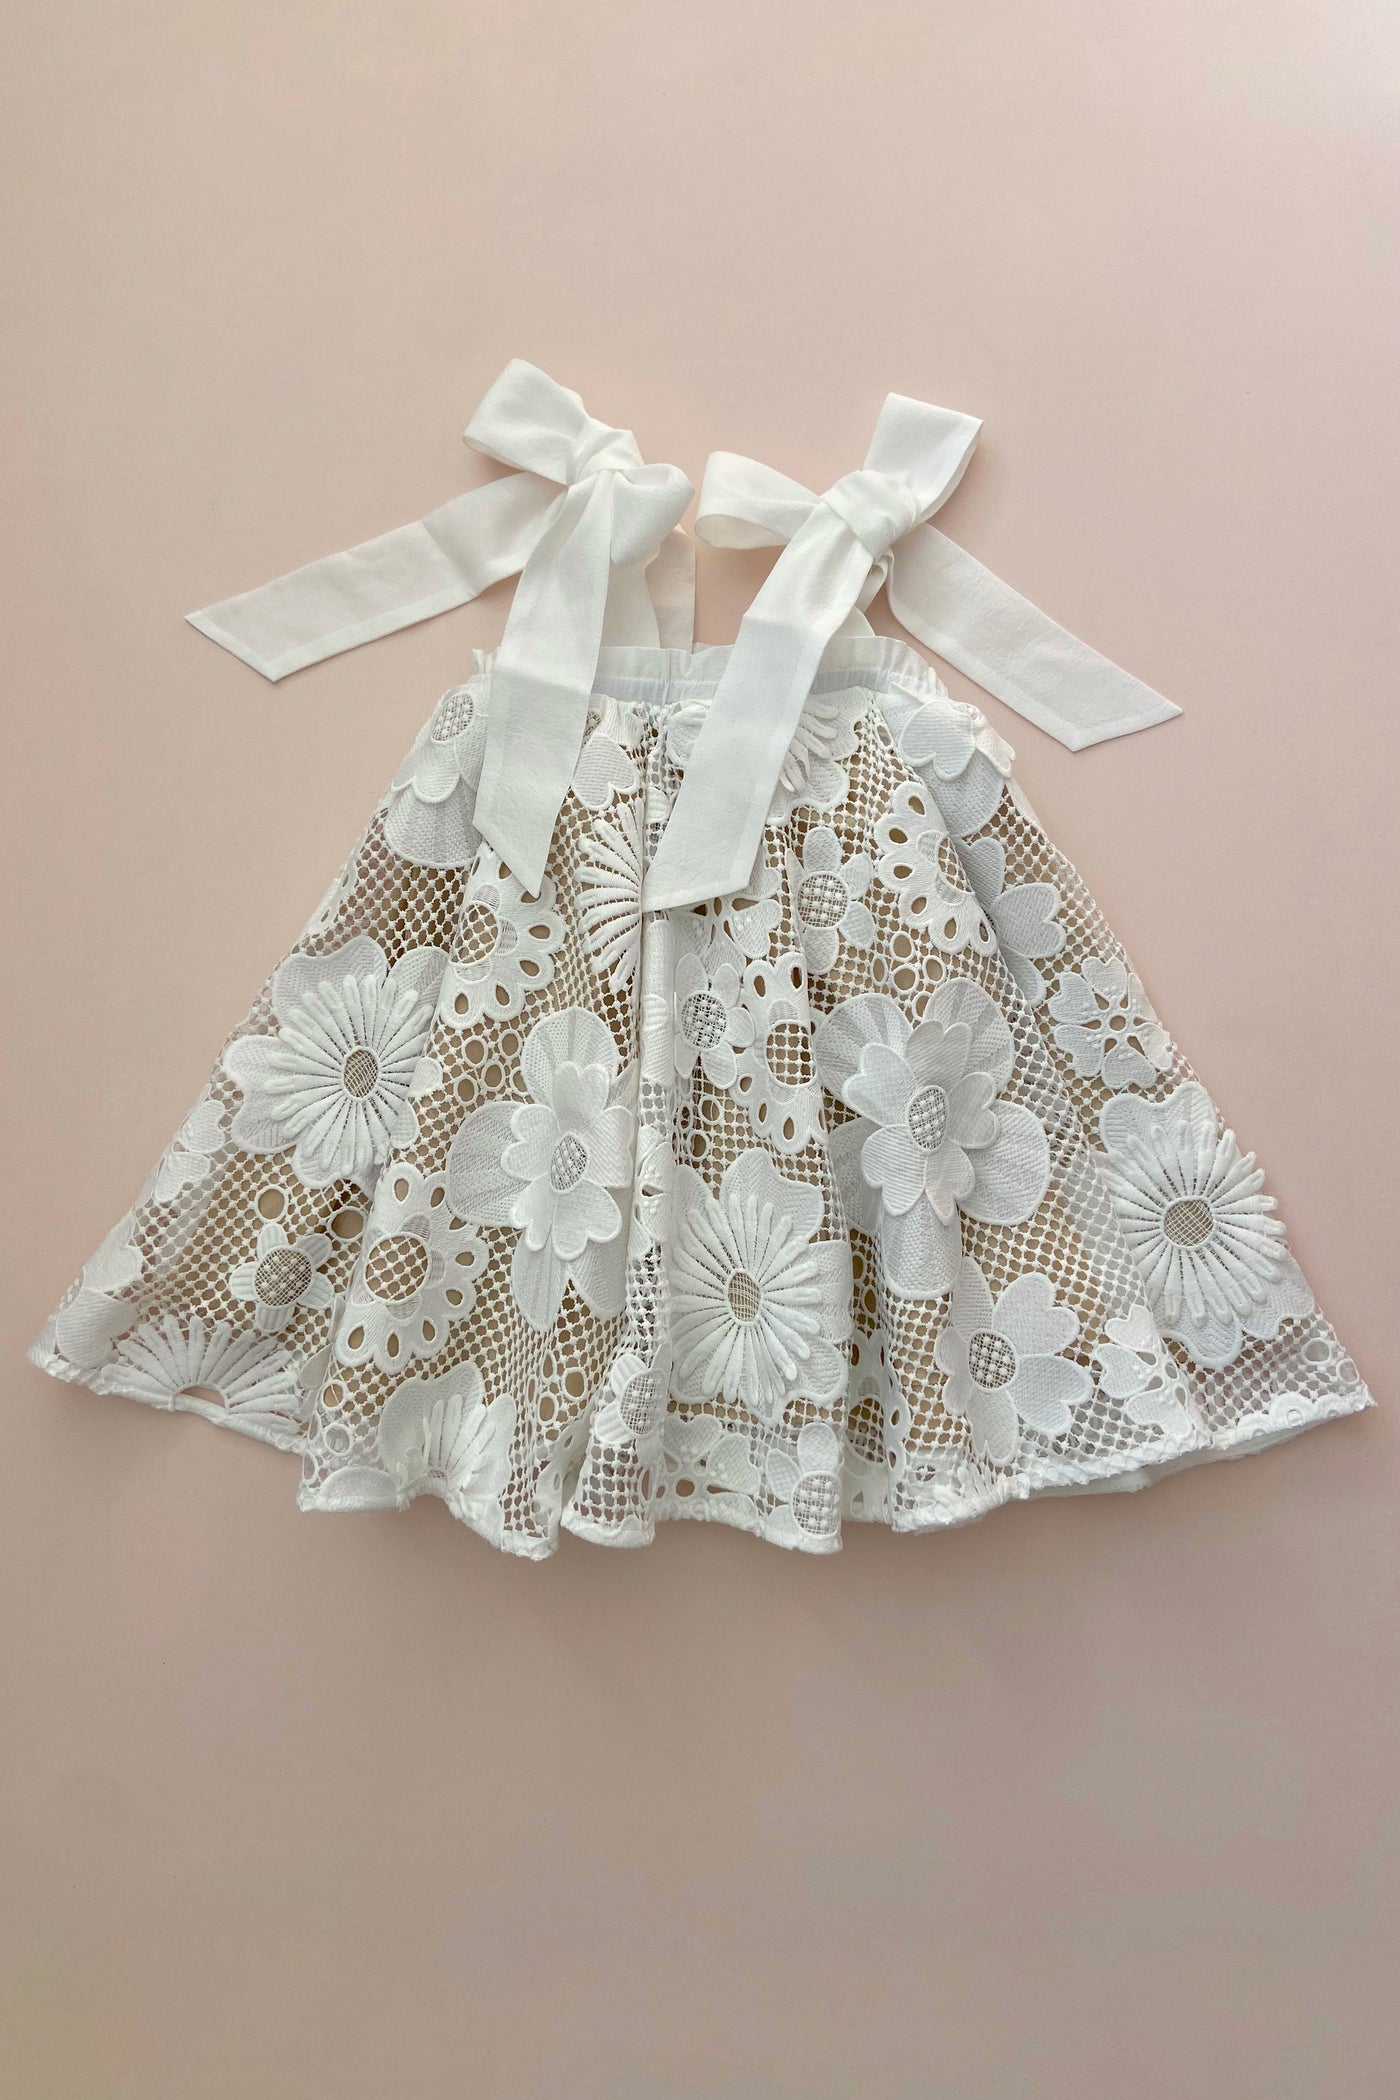 In The Meadows Dress - Snow White 70's Lace